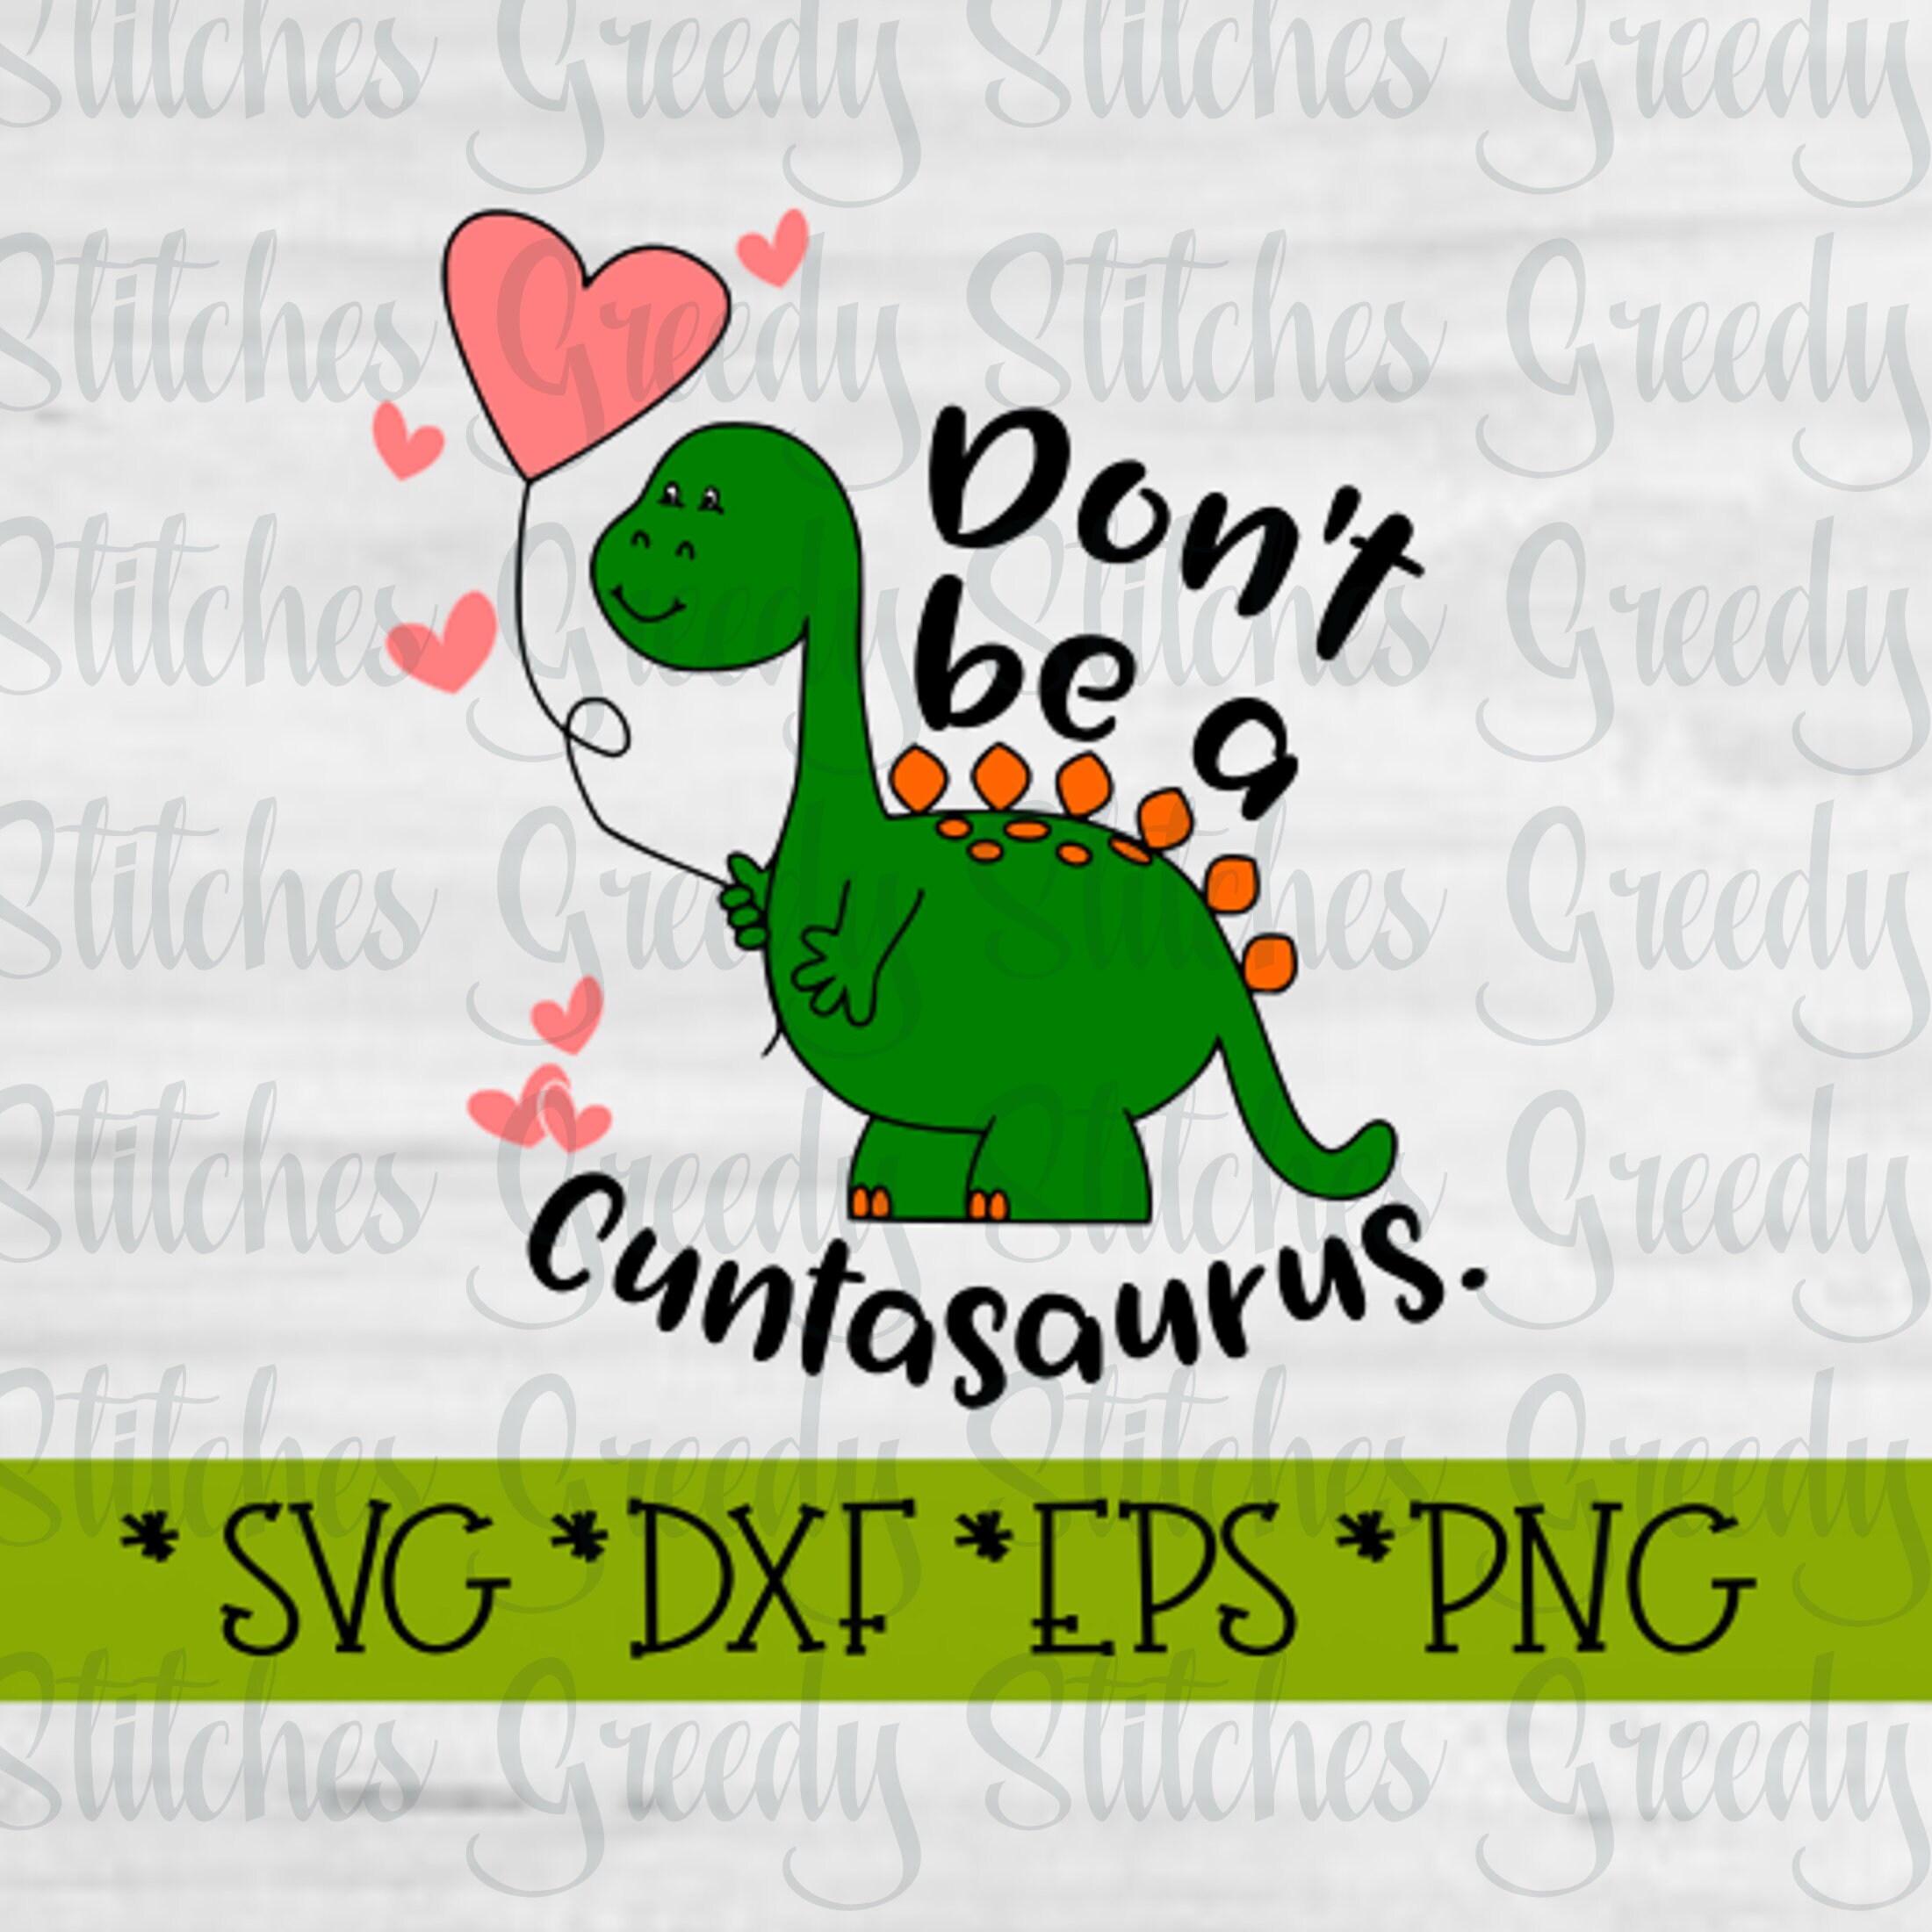 Don't be a cuntasaurus svg